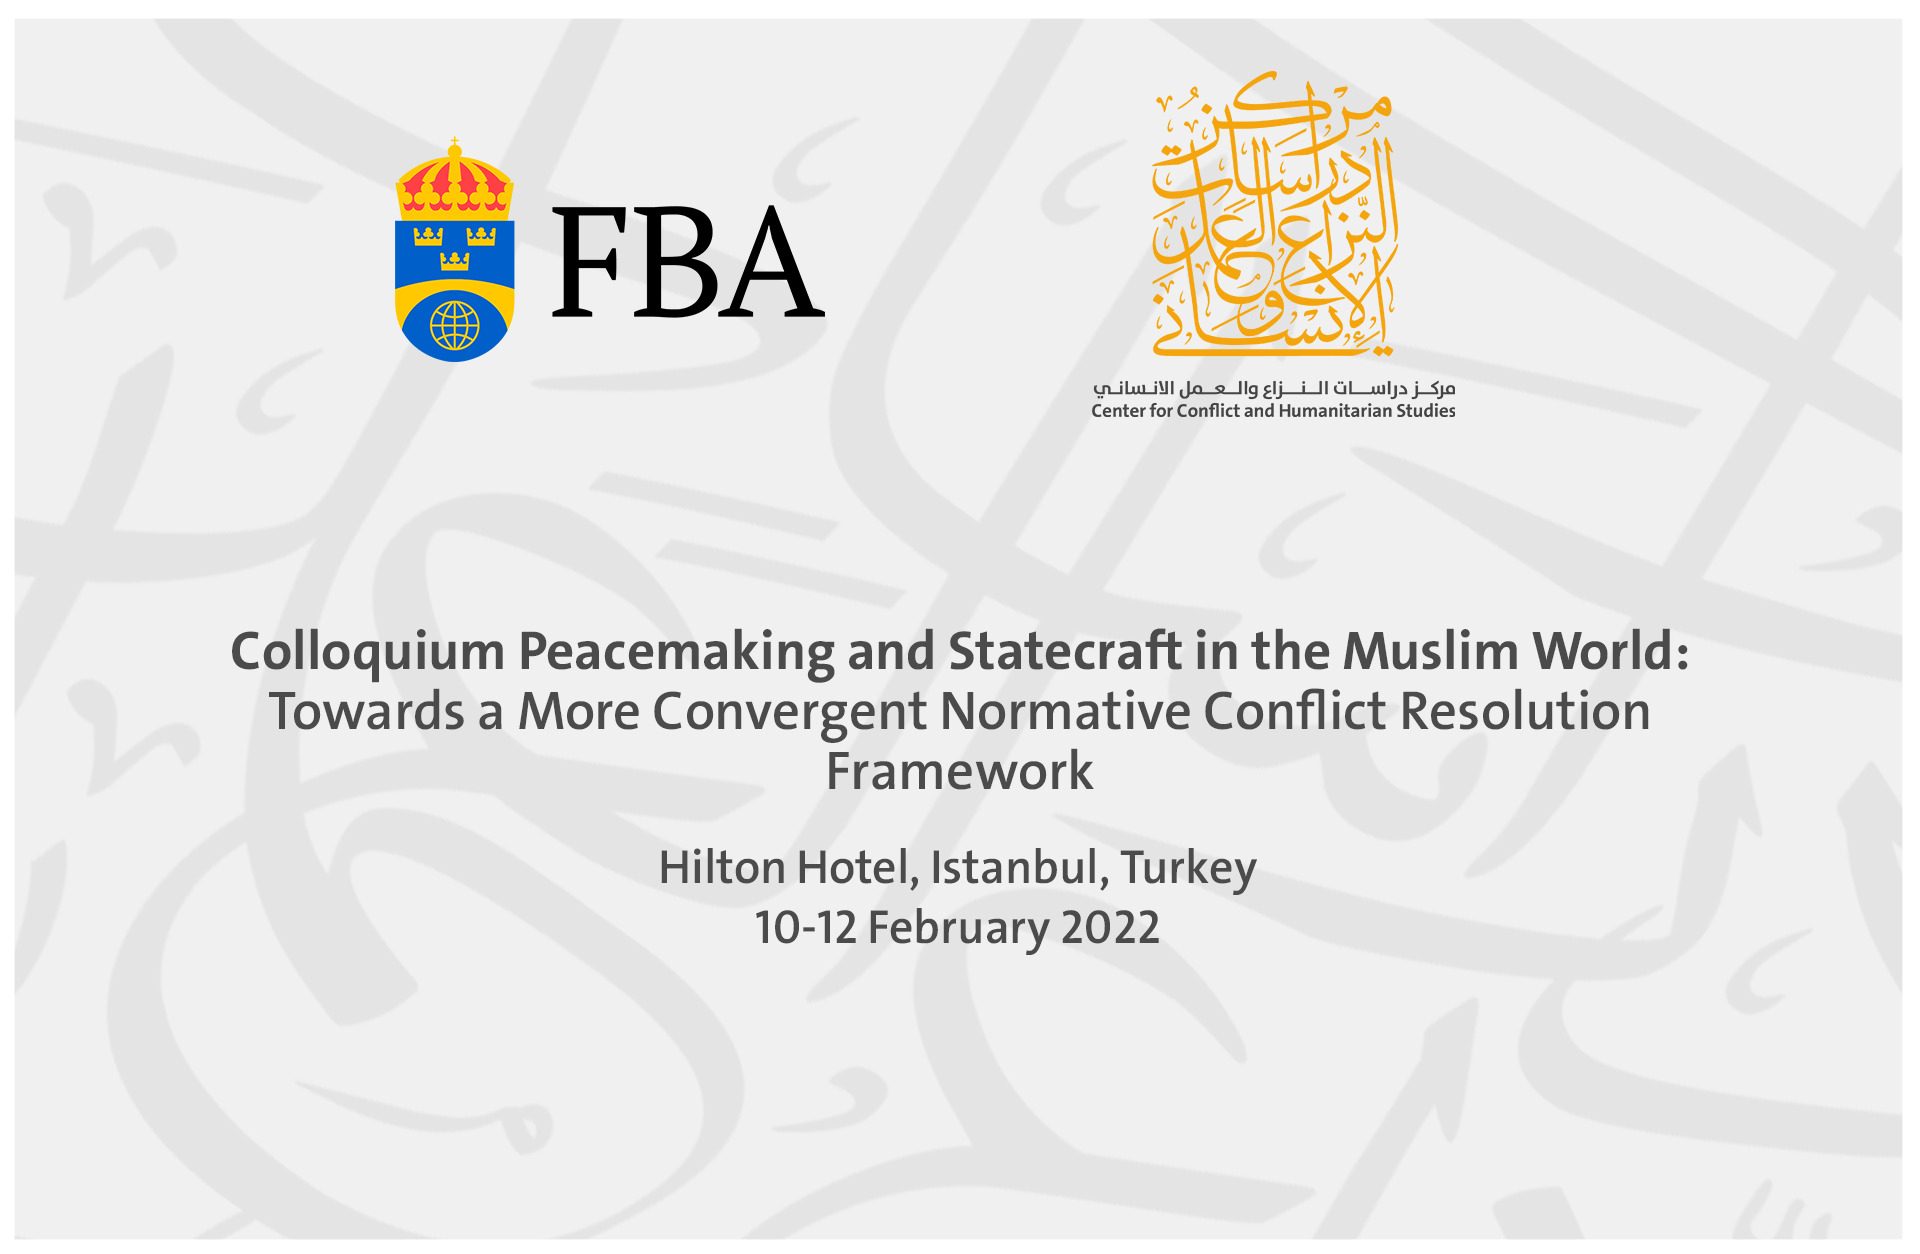 Peacemaking and Statecraft in the Muslim World